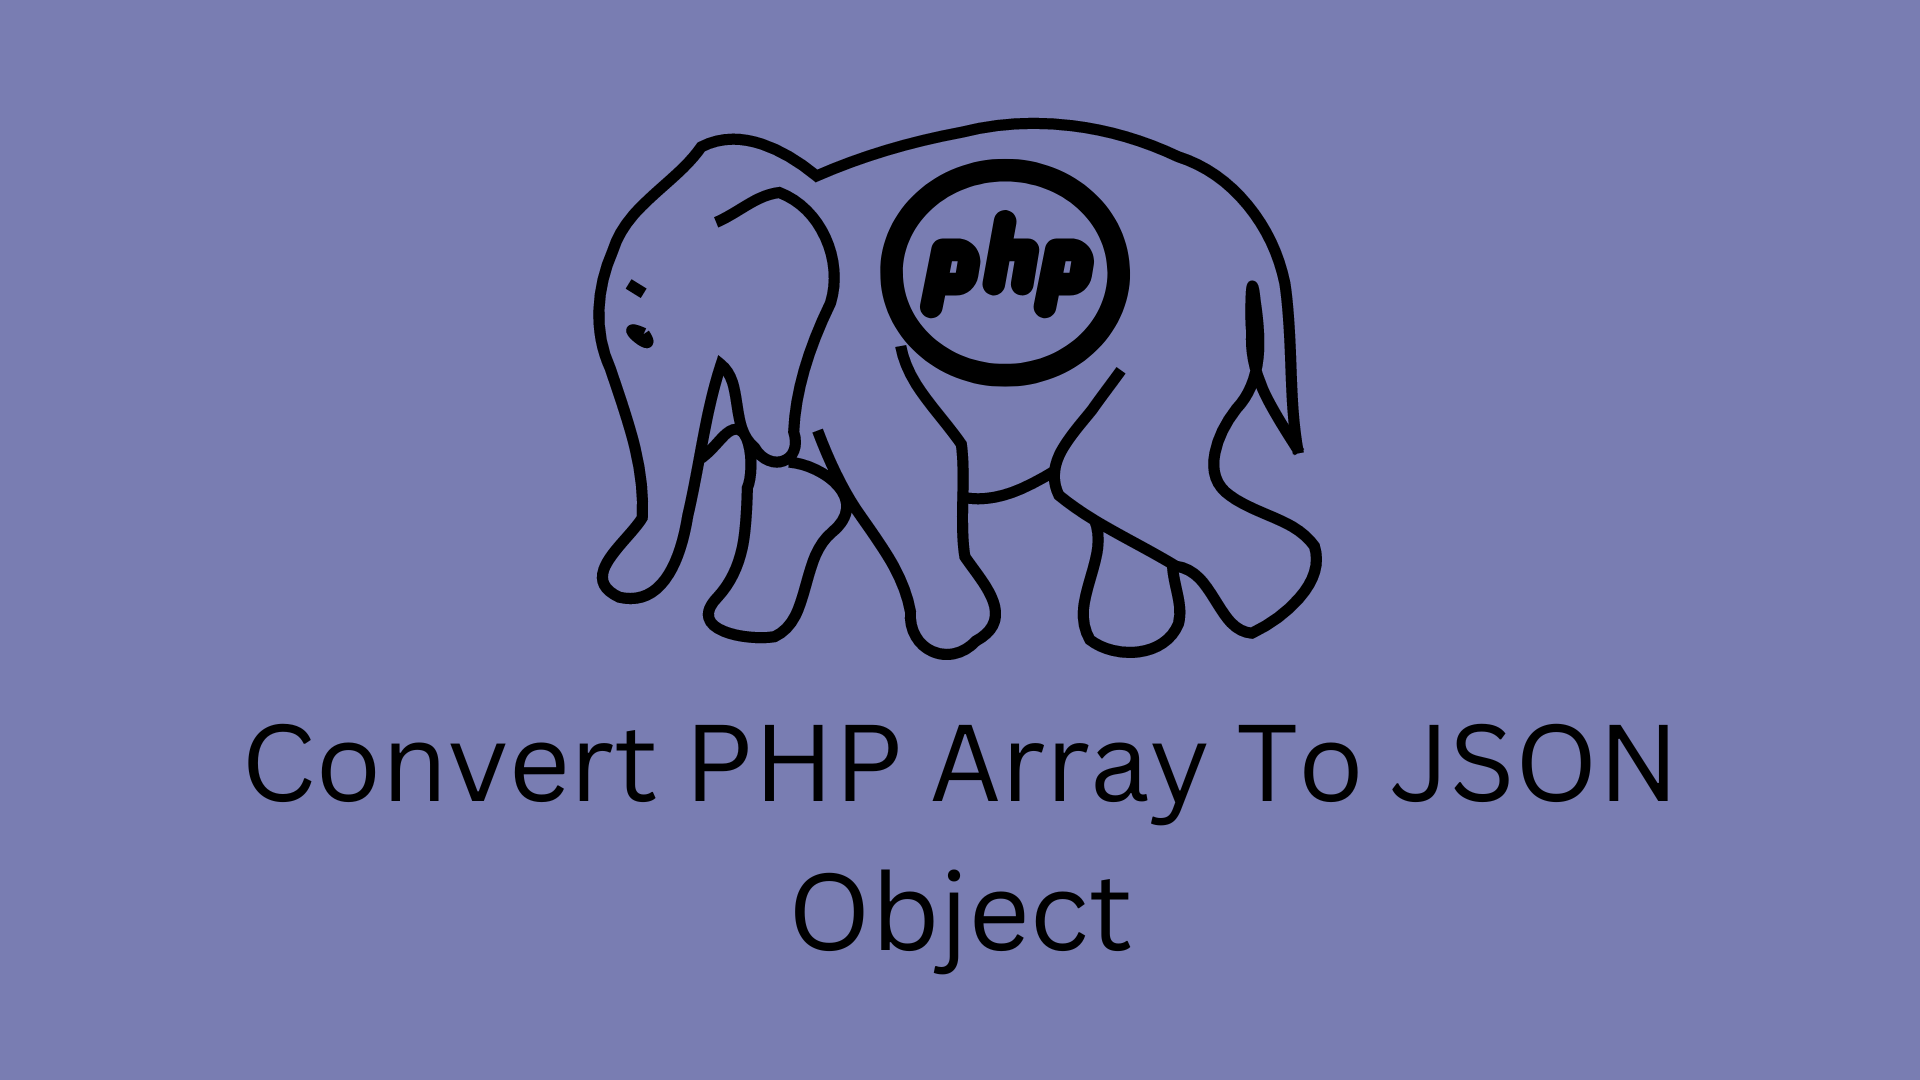 Convert PHP Array To JSON Object